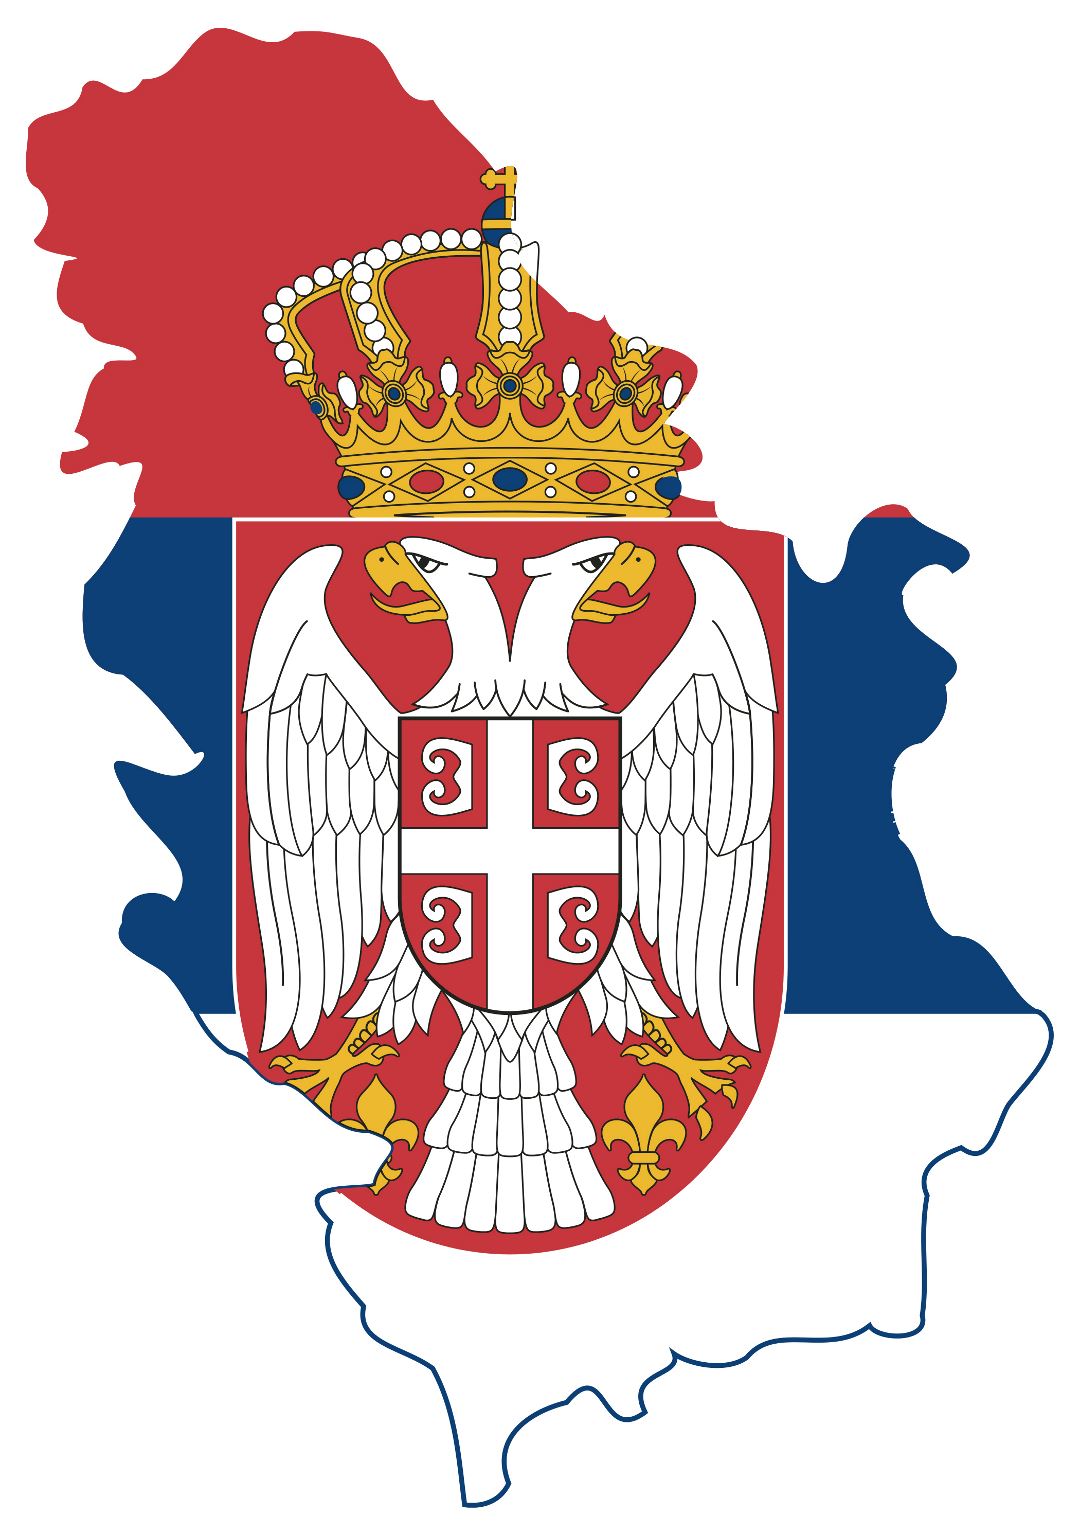 Large flag map of Serbia